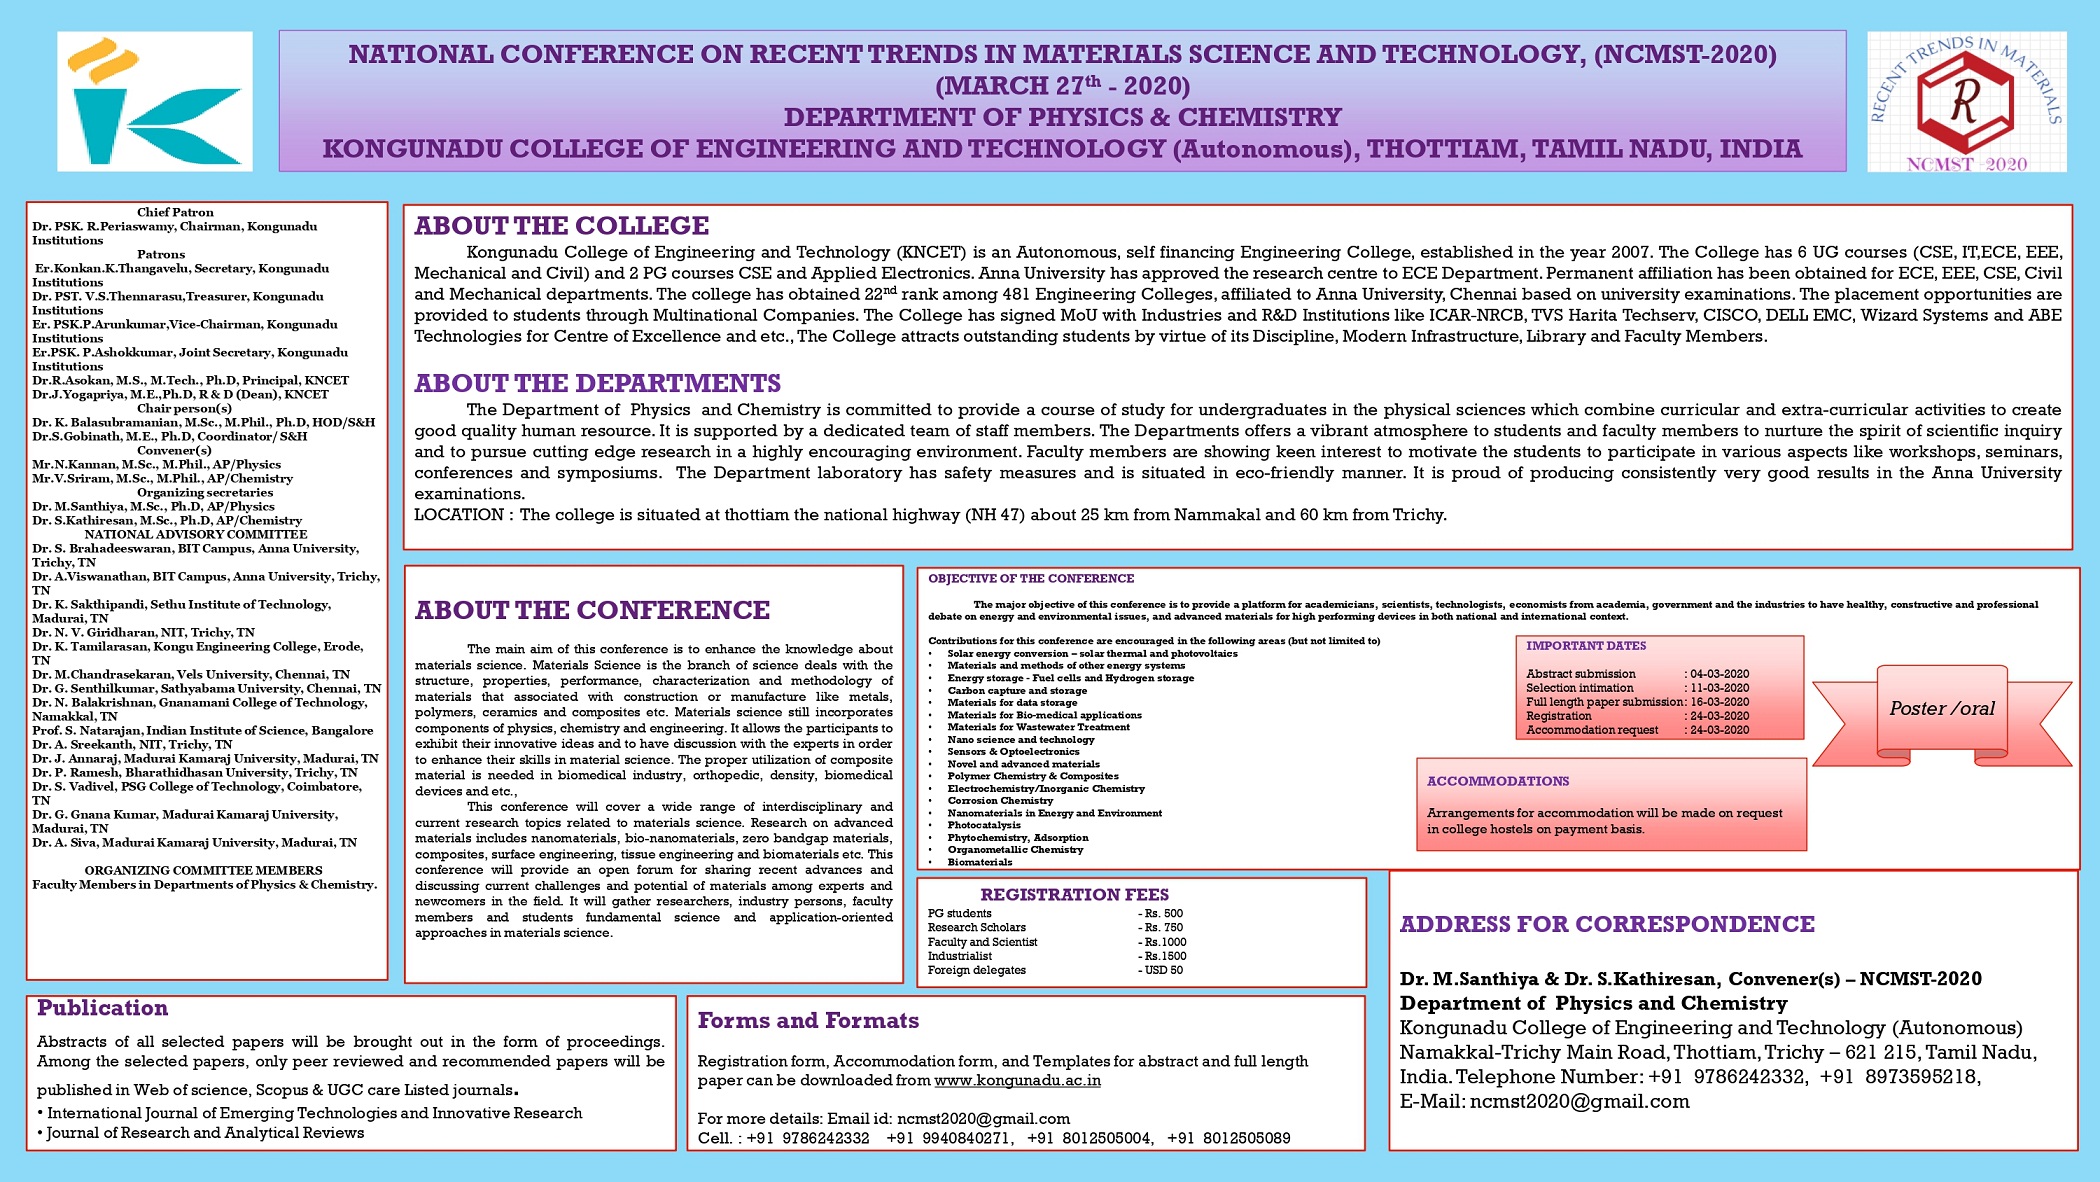 National Conference on Recent Trends in Materials Science and Technology NCMST 2020